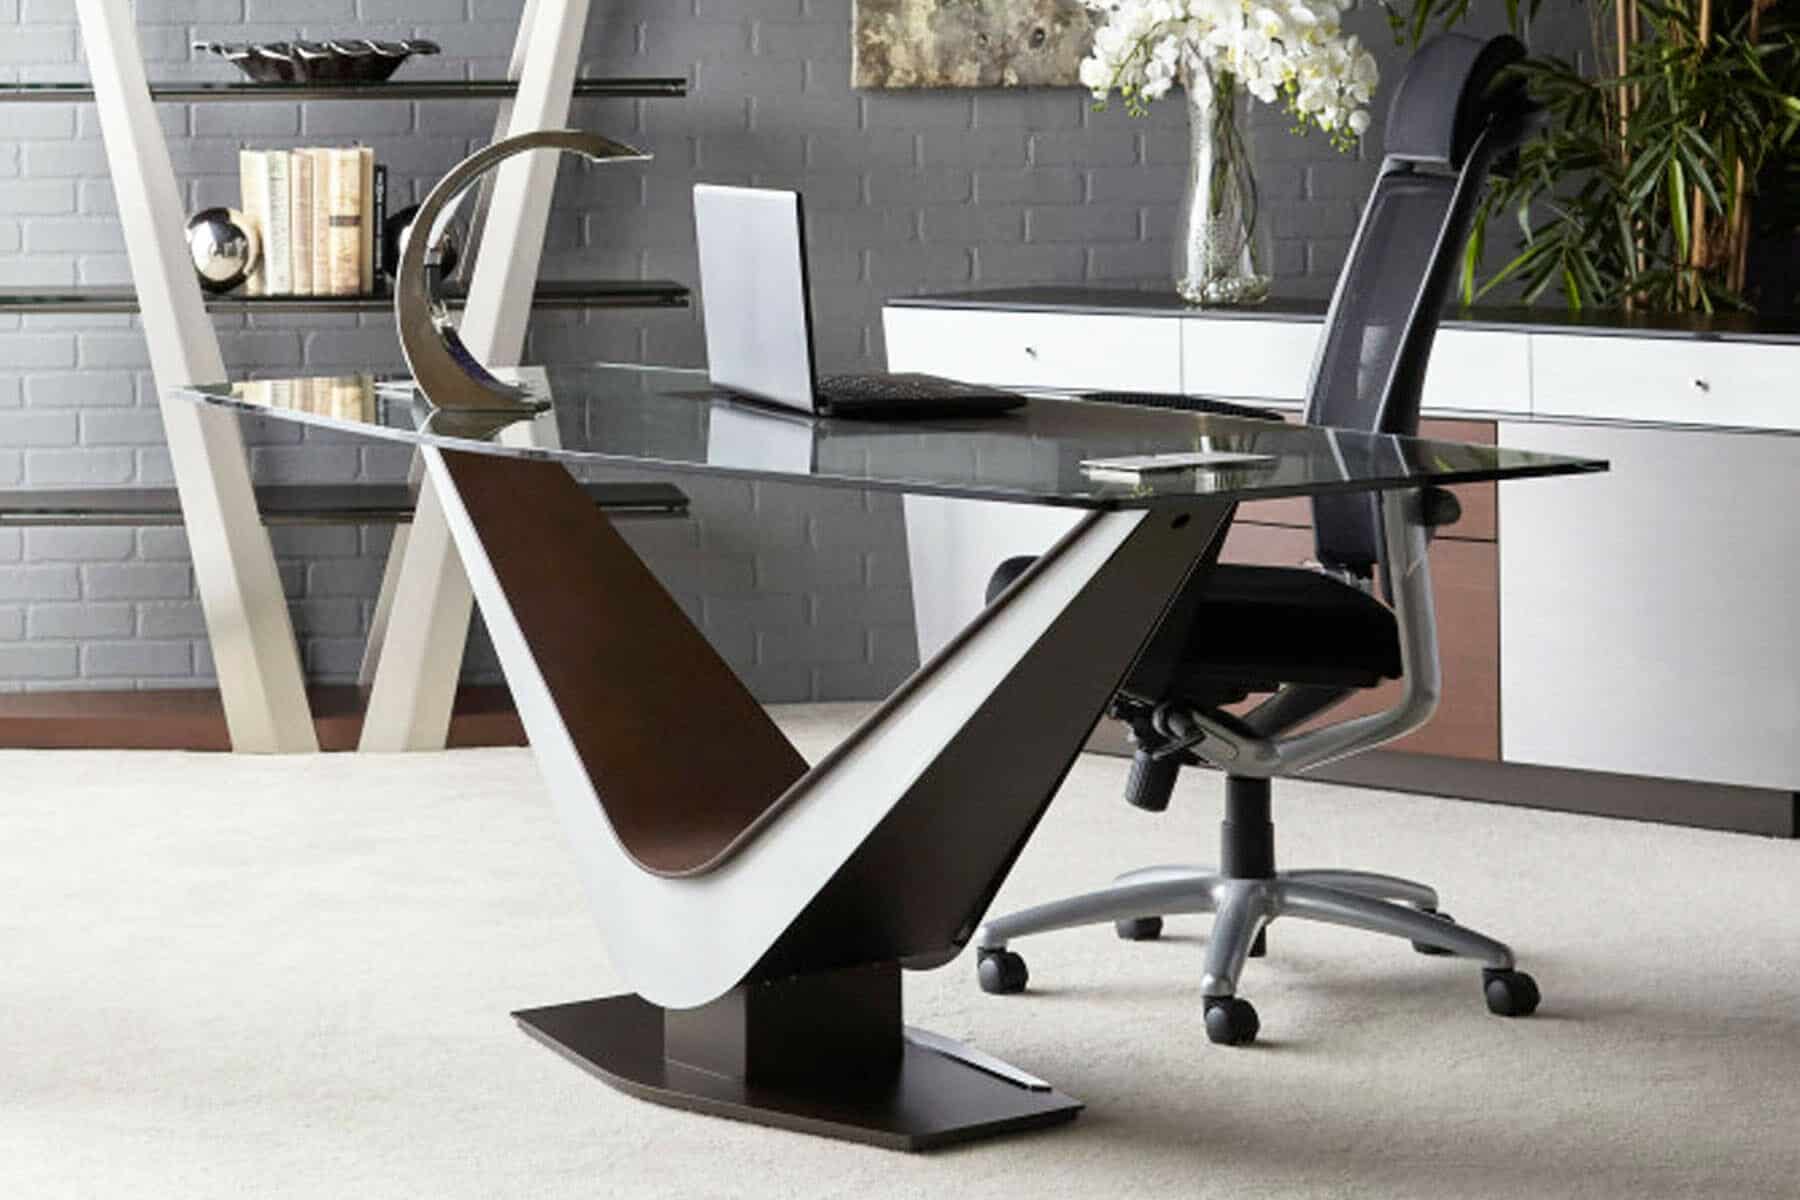 Modern Office Design Style: What is It? Modern-Style Office